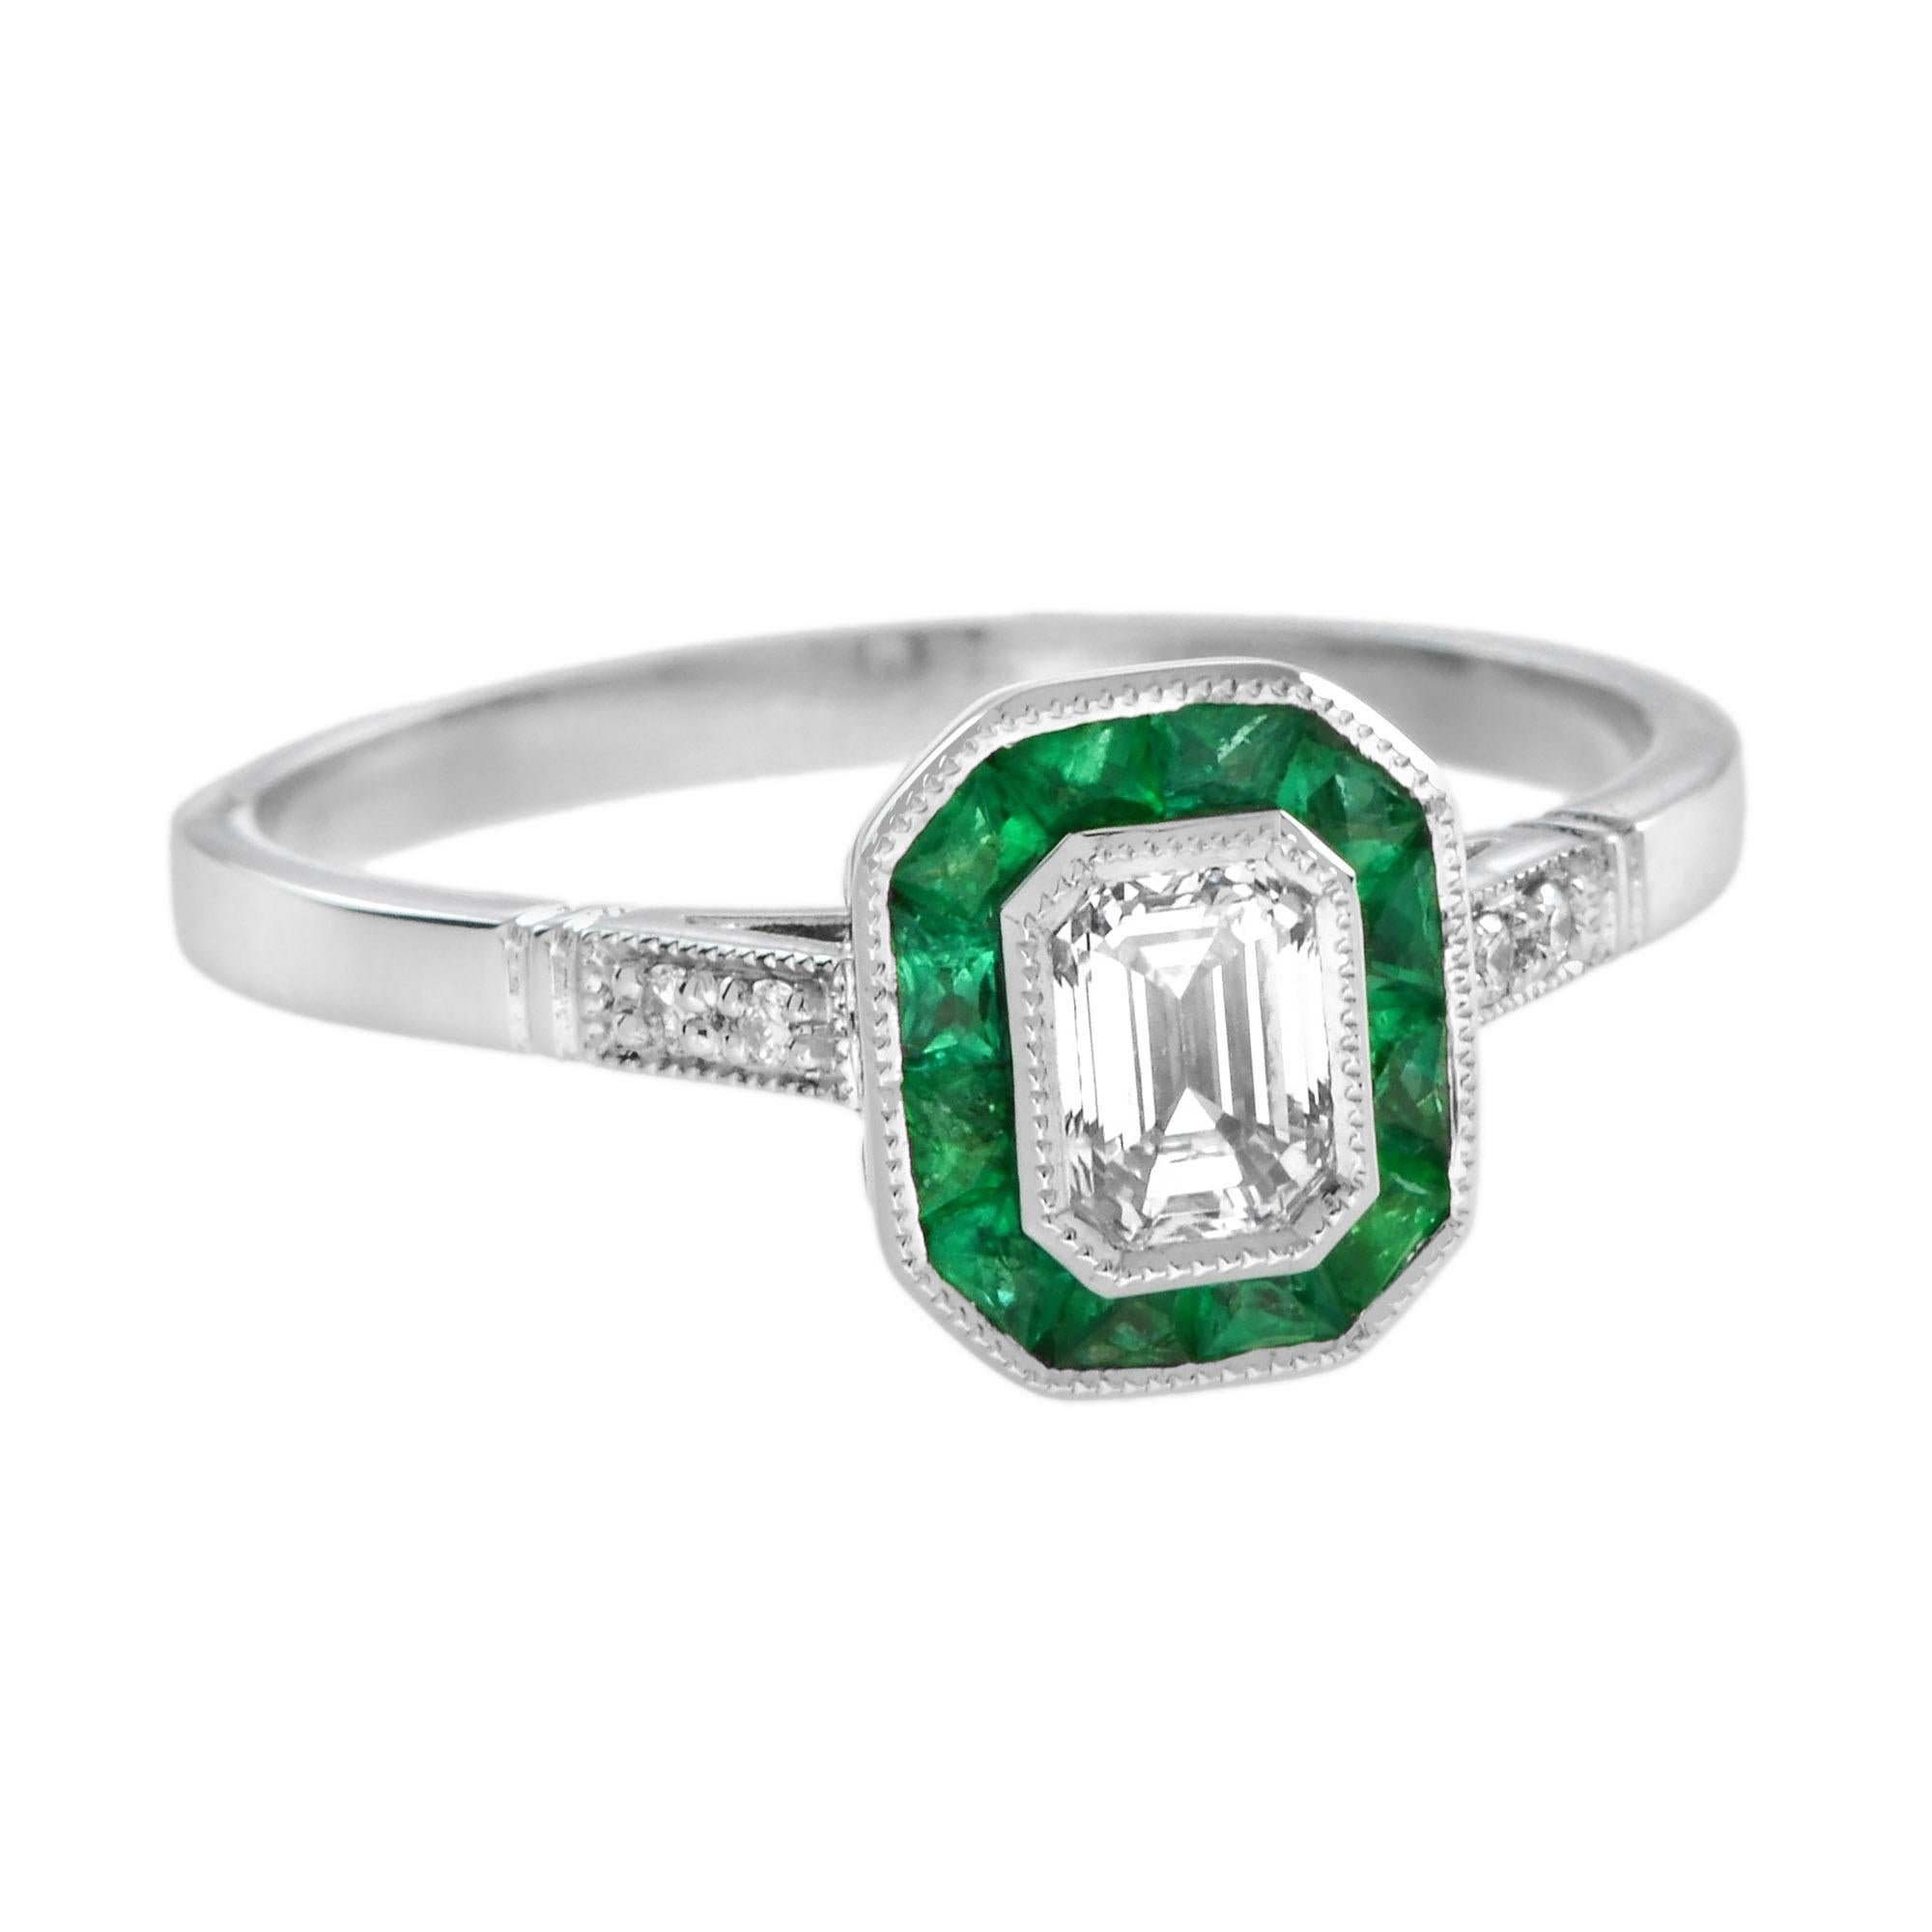 For Sale:  Emerald Cut Diamond and Emerald Art Deco Style Engagement Ring in 18K White Gold 3